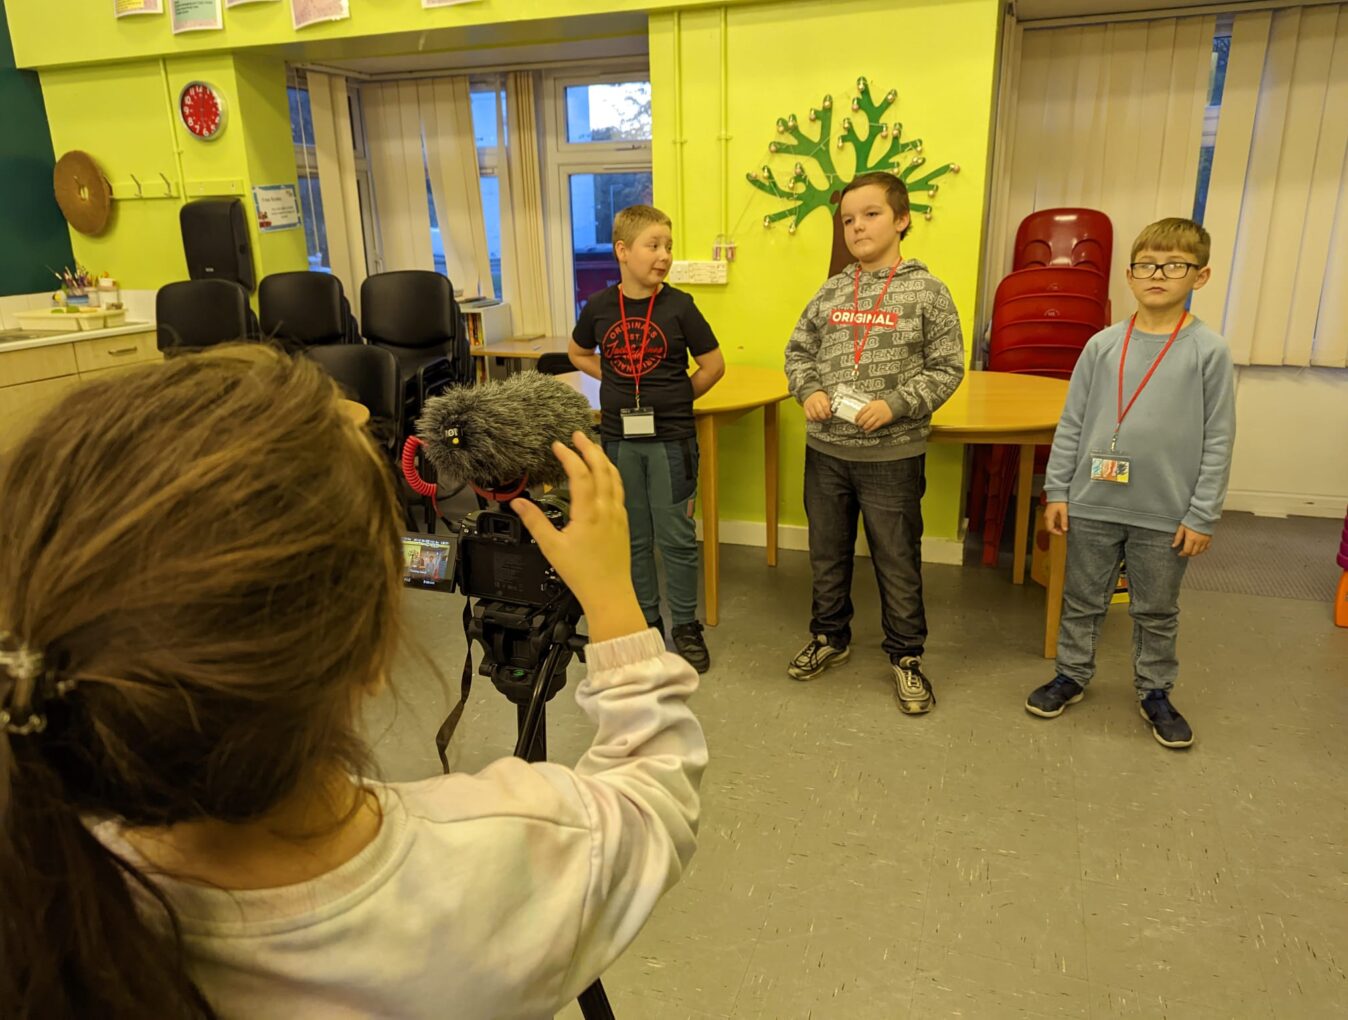 Children filming one another for a mini documentary.